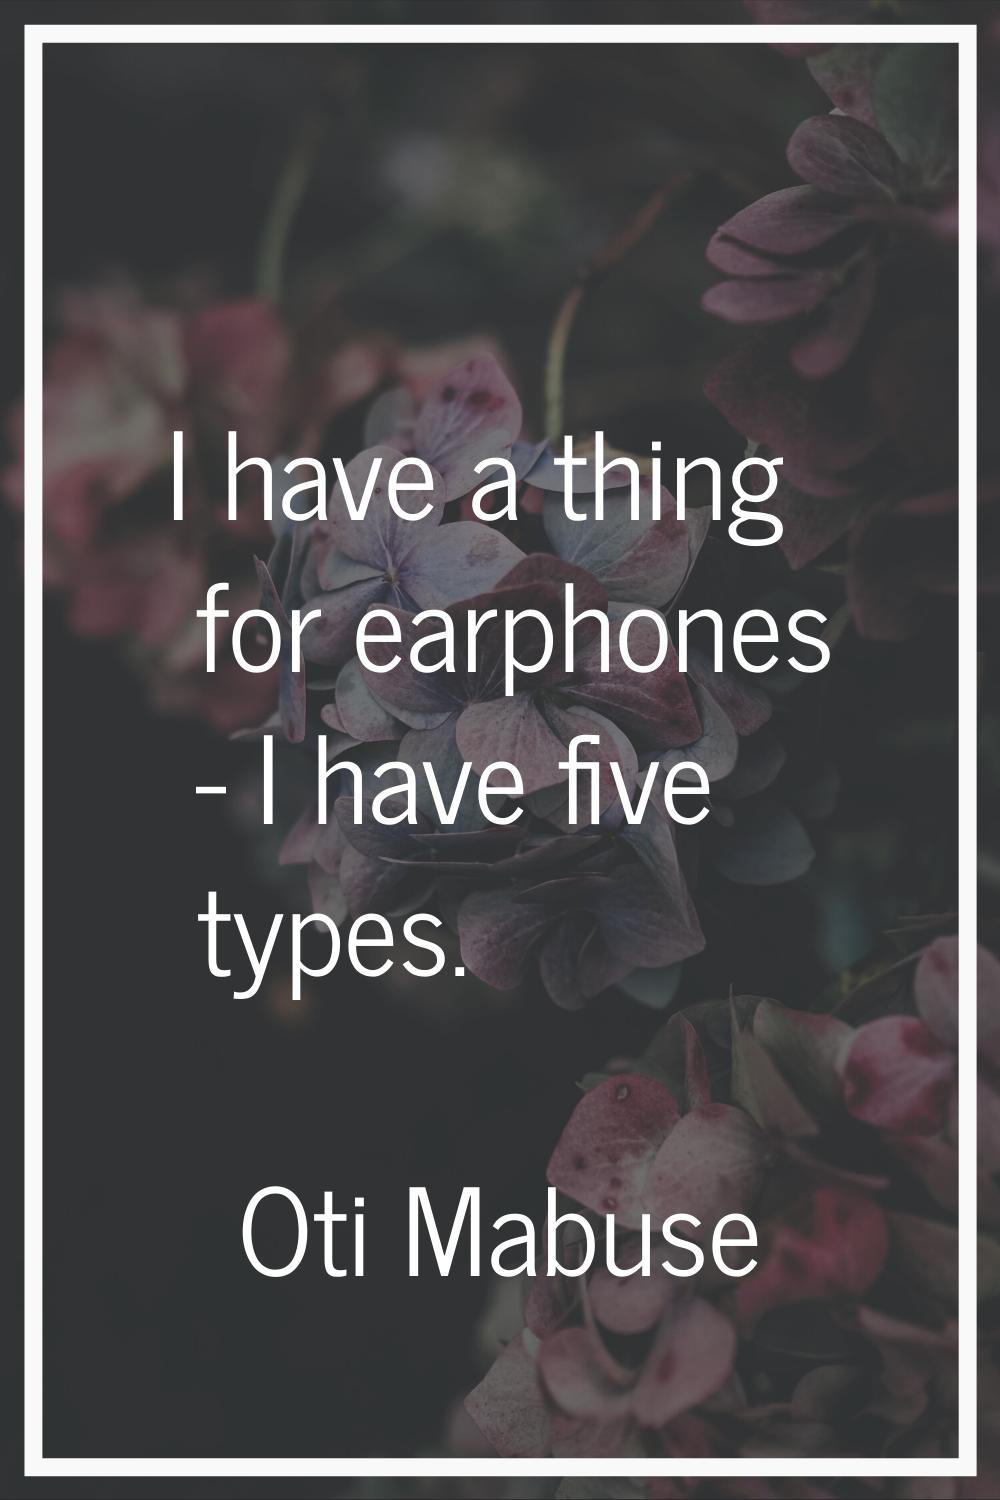 I have a thing for earphones - I have five types.